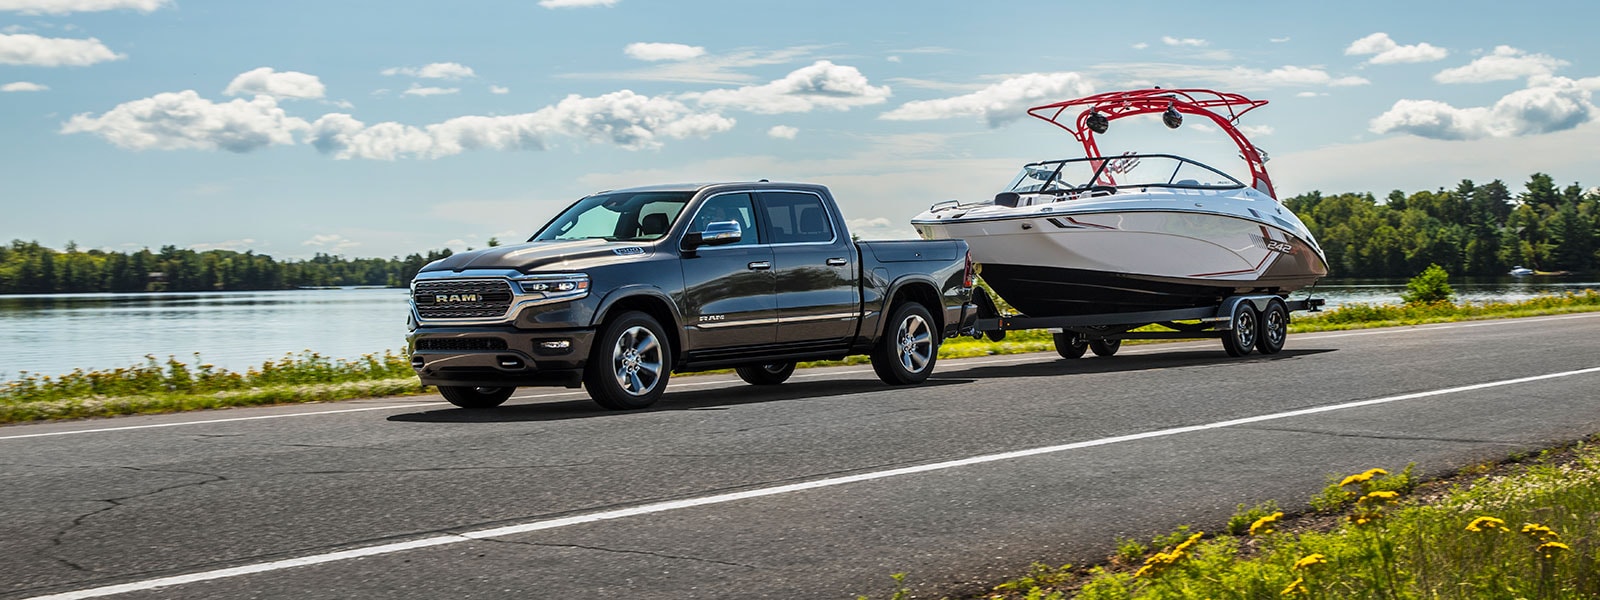 Ram 1500 Towing A boat